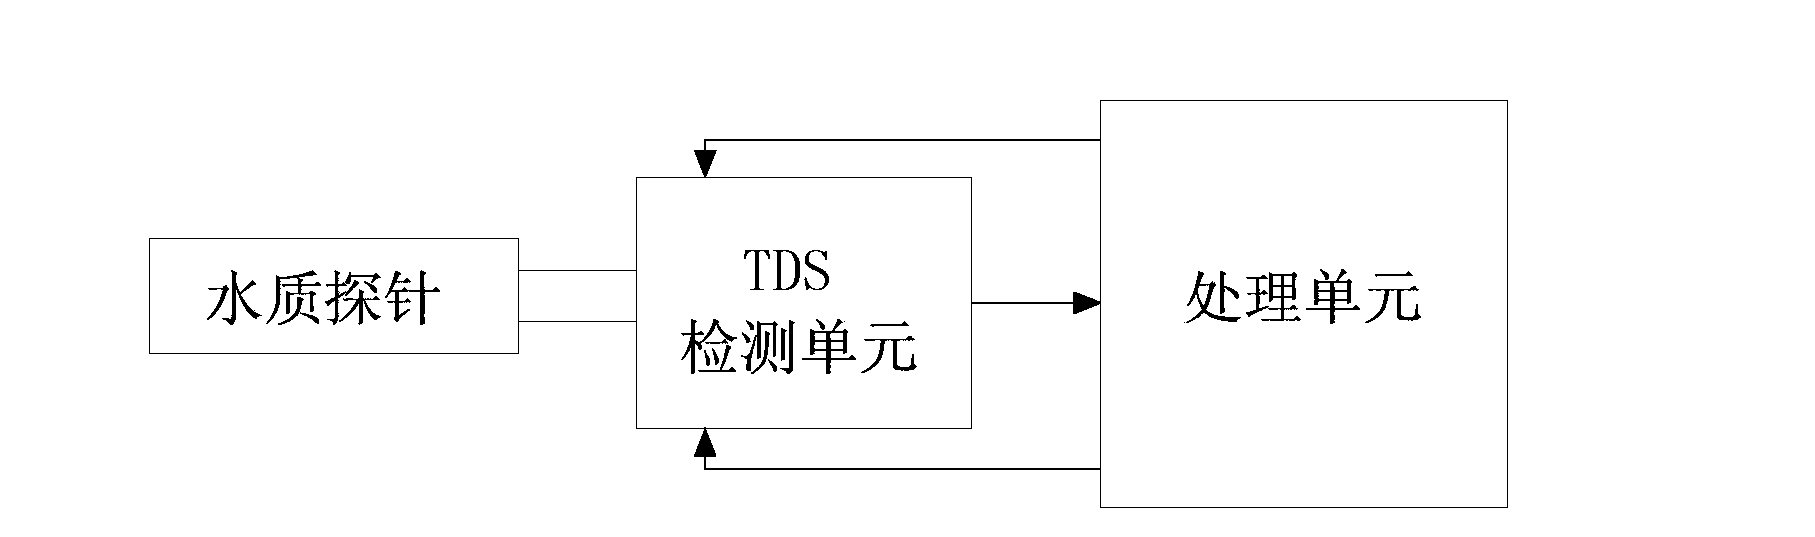 Detection circuit and detection method of total dissolved solids (TDS)